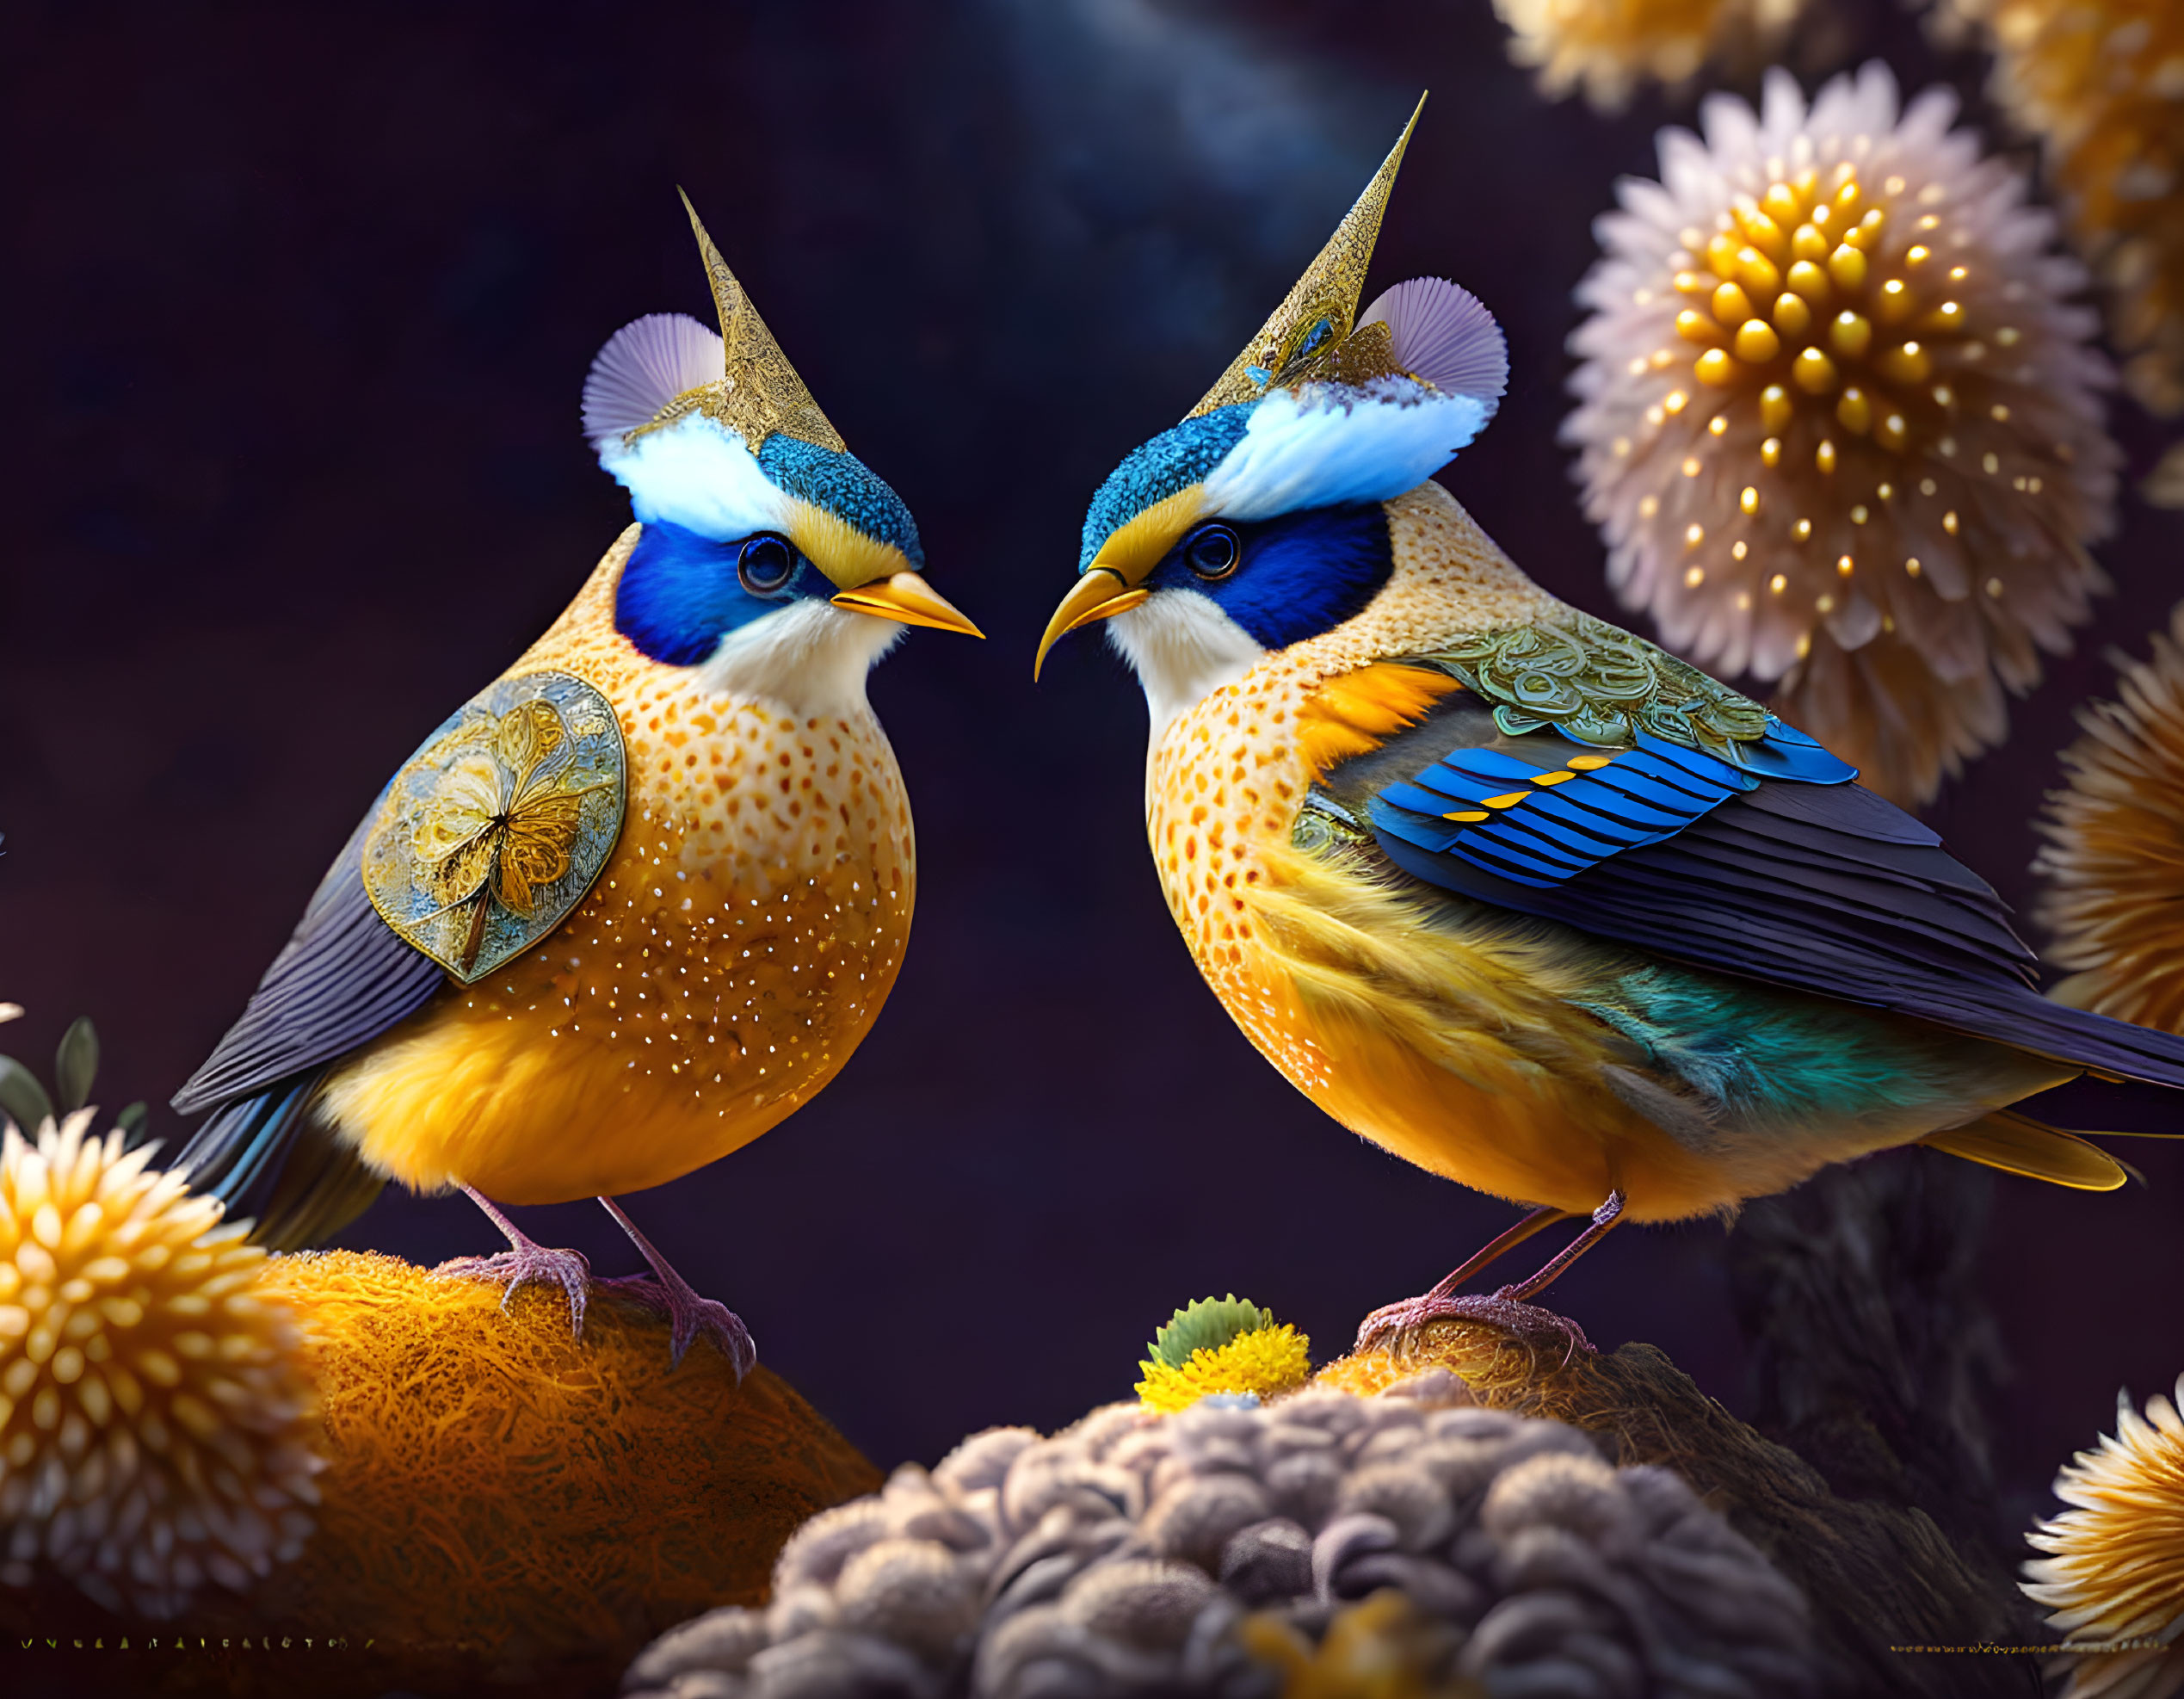 Colorful Fantastical Birds with Elaborate Plumage and Crests Among Exotic Flowers